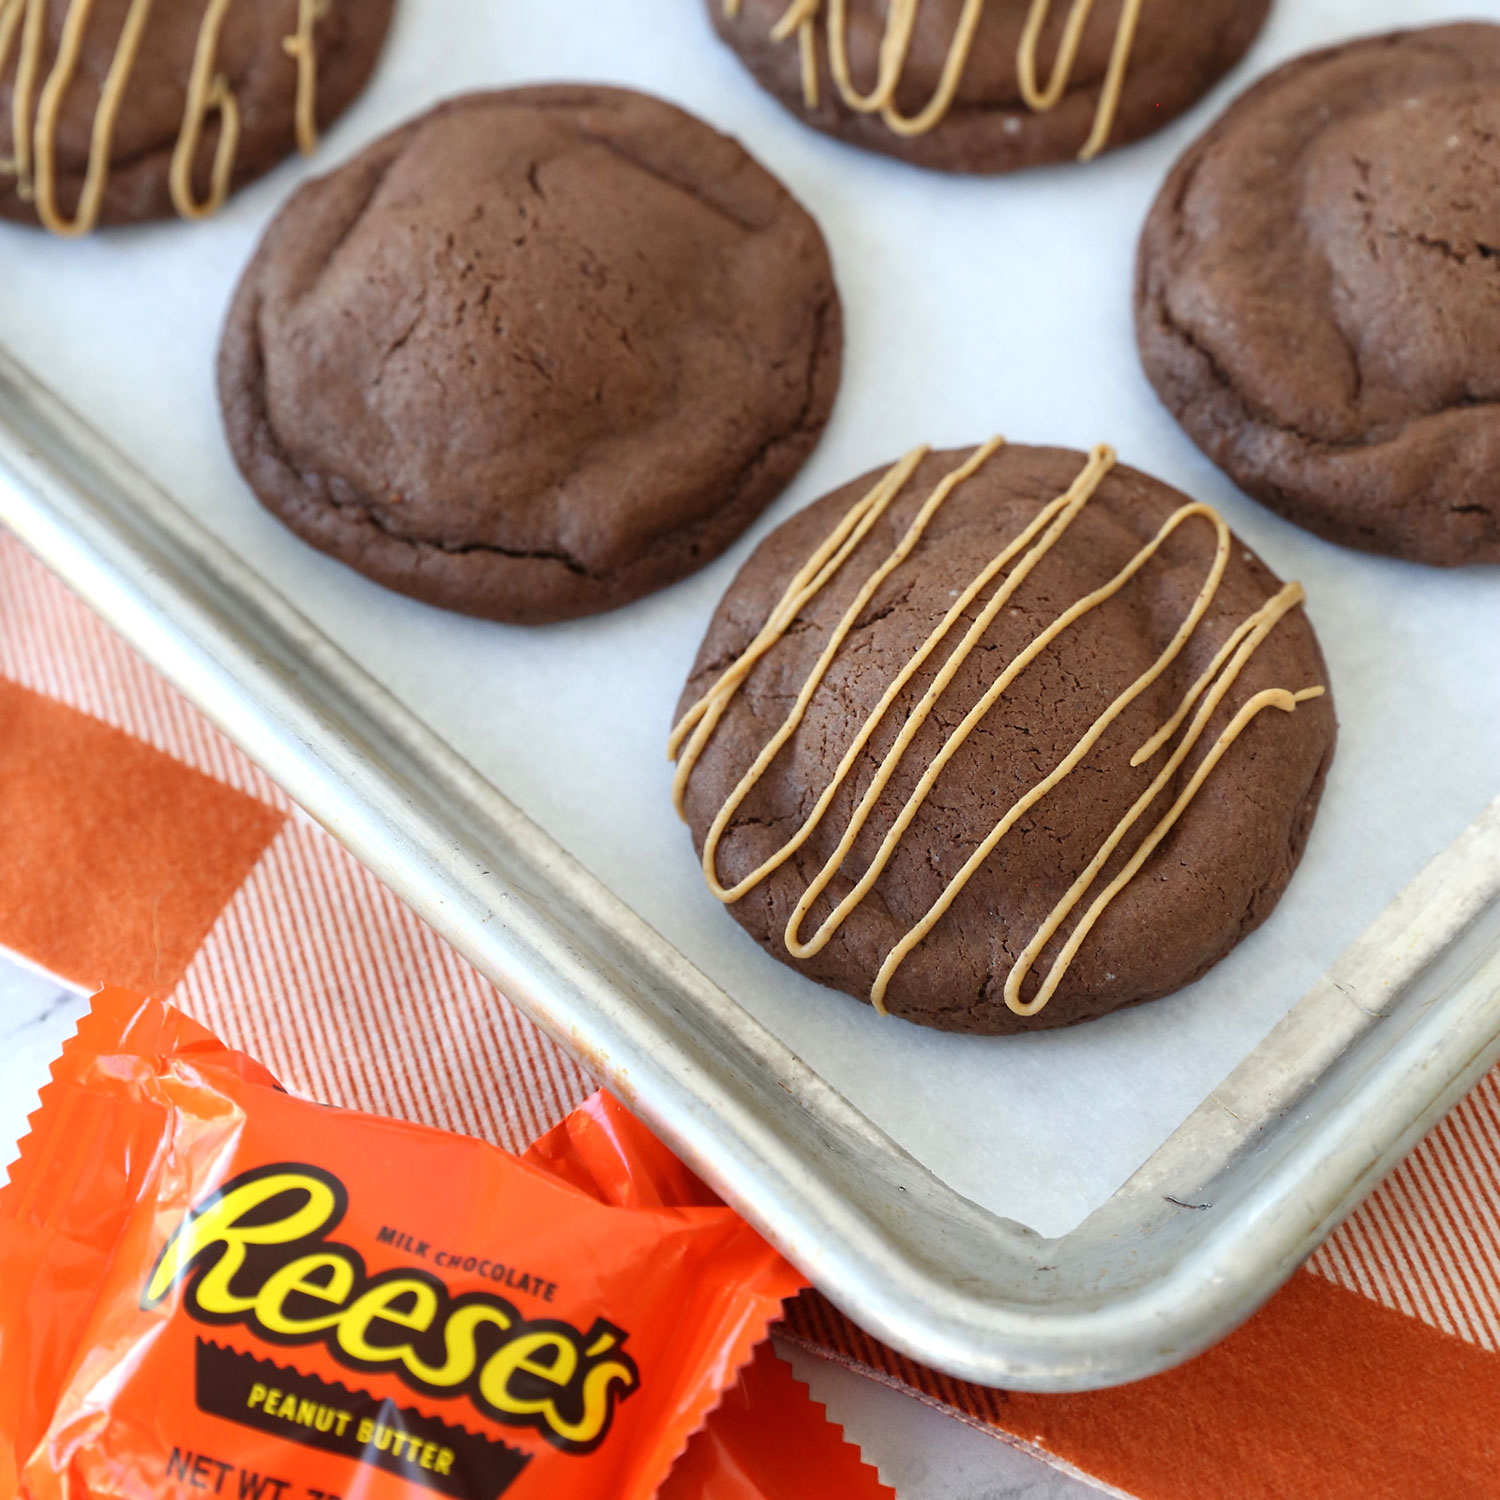 Chocolate peanut butter cup cookies.